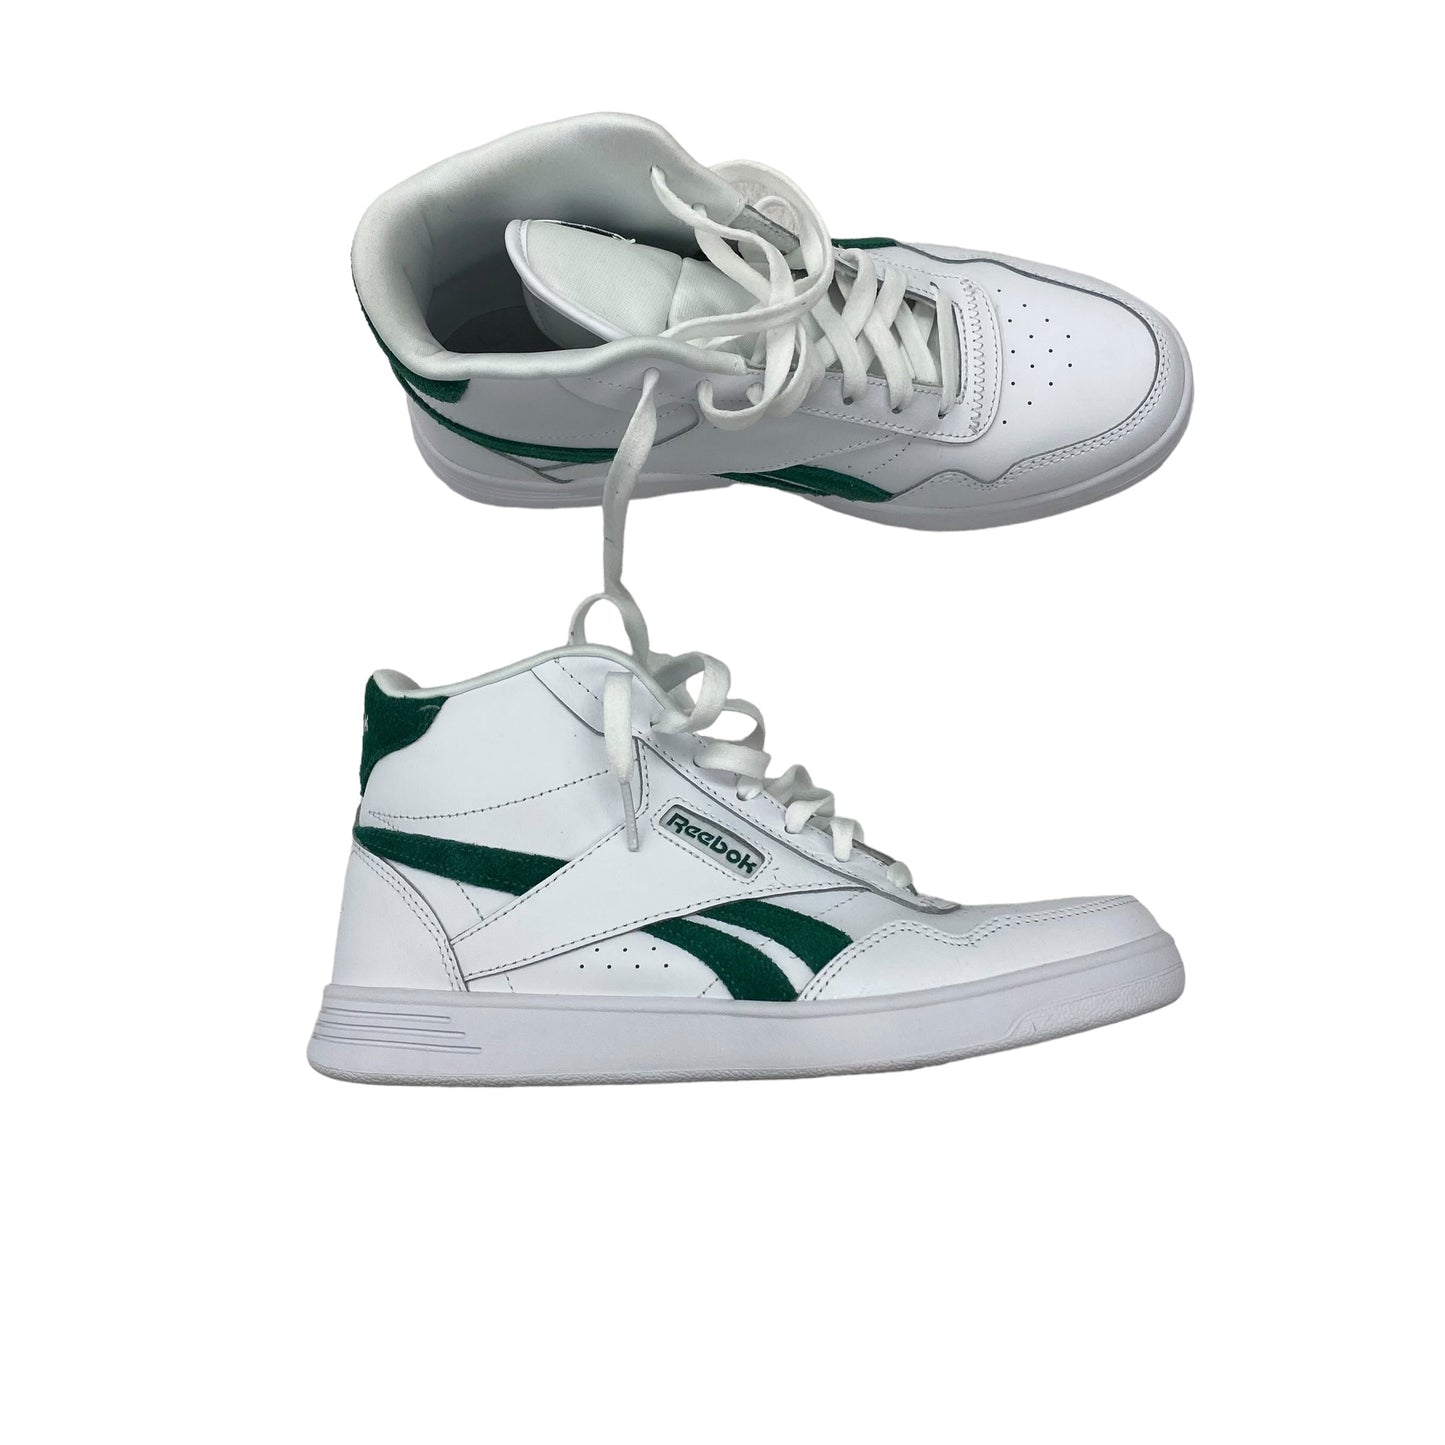 Shoes Sneakers By Reebok  Size: 8